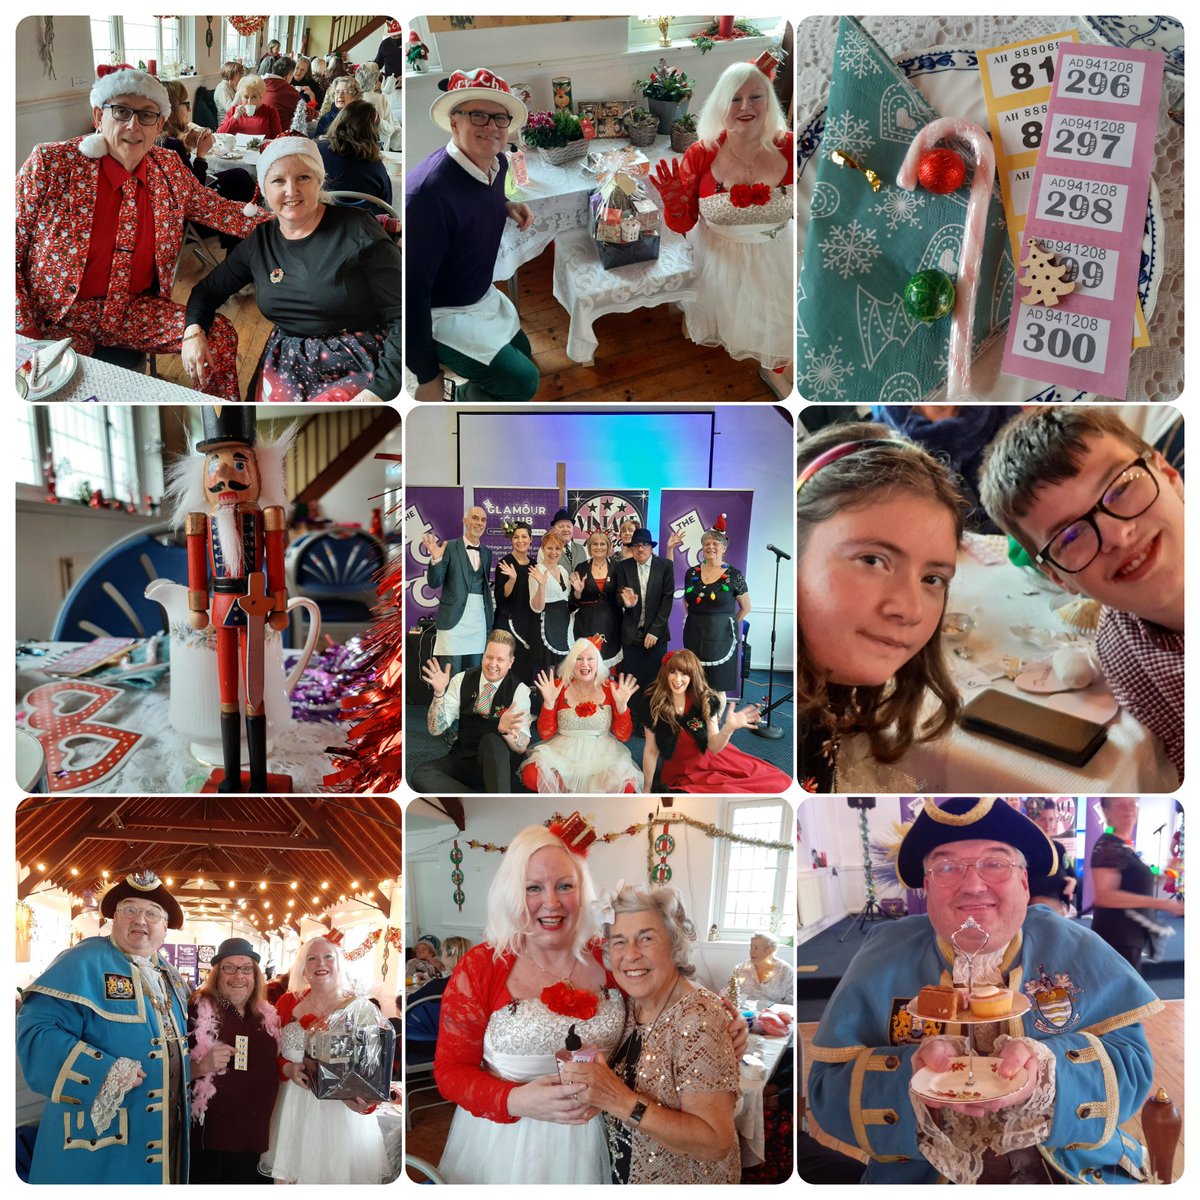 Promedica24 West Sussex gave such joy to our guests with the top quality thoughtful gifts 🎁 They absolutely loved it. Yesterday was a very special day indeed. If you want to get involved please do get in touch, all the usual ways. Thank you. @Promedica24 @WorthingTown